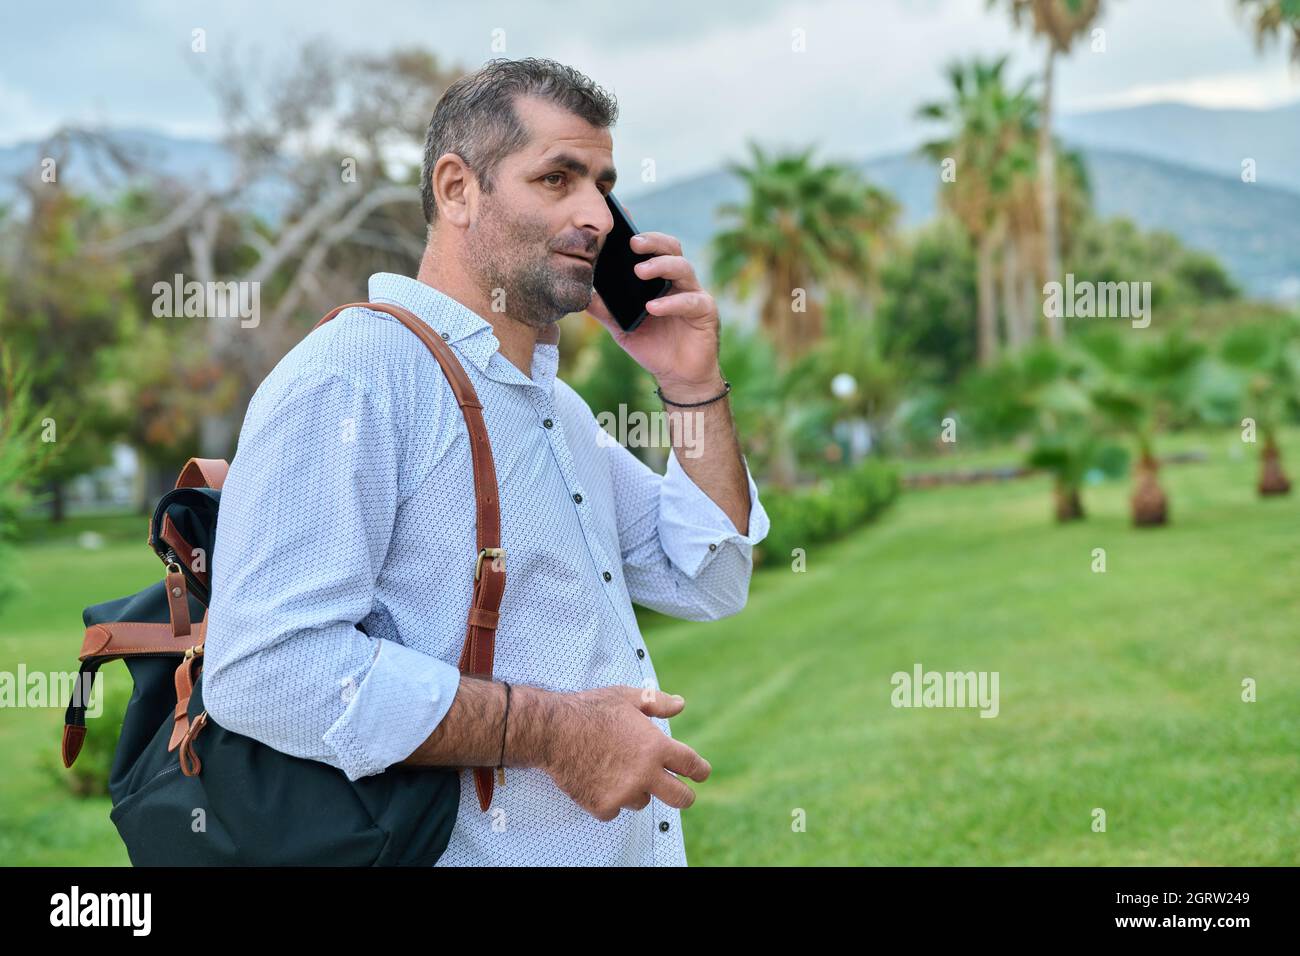 Mature business man talking on the phone outdoors Stock Photo